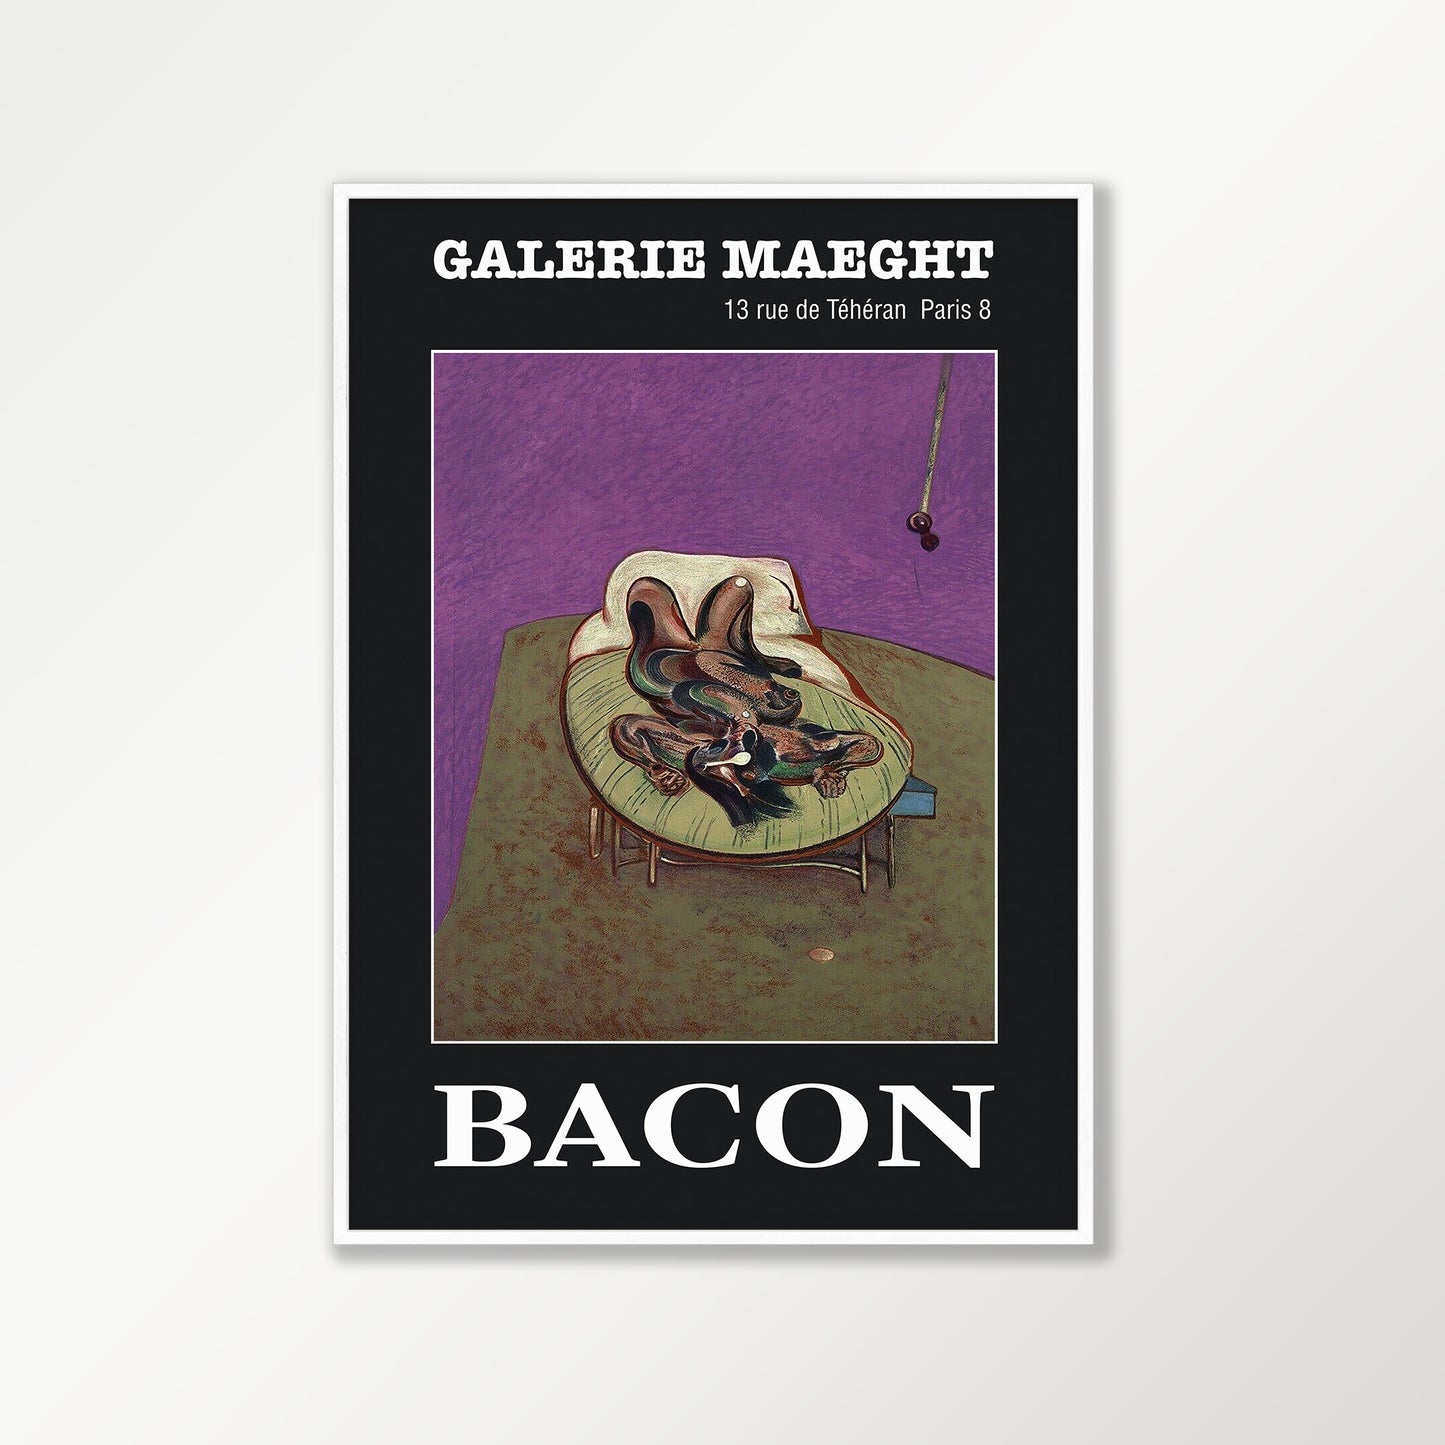 Francis Bacon Galerie Maeght Exhibition Poster